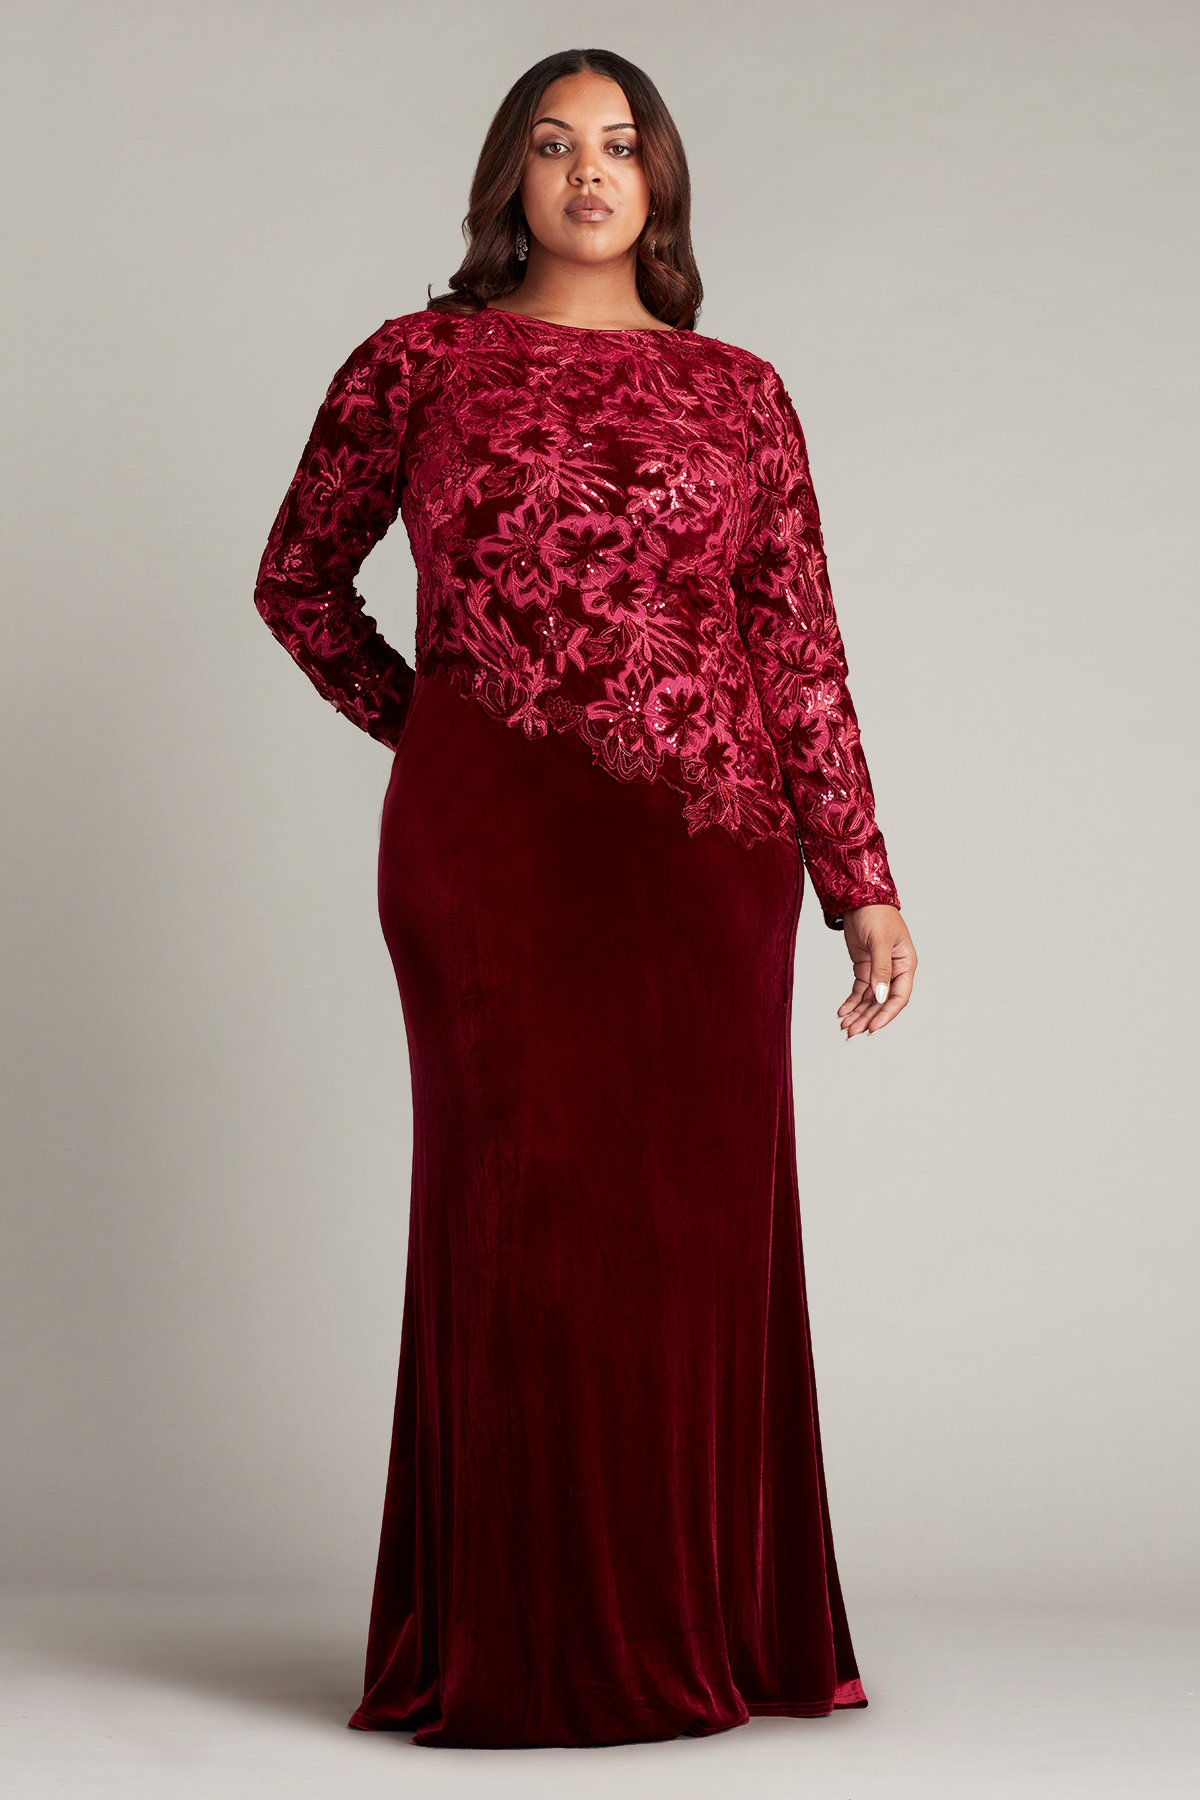 wine Red Velvet Gown | Party wear gown, Gowns, Party wear